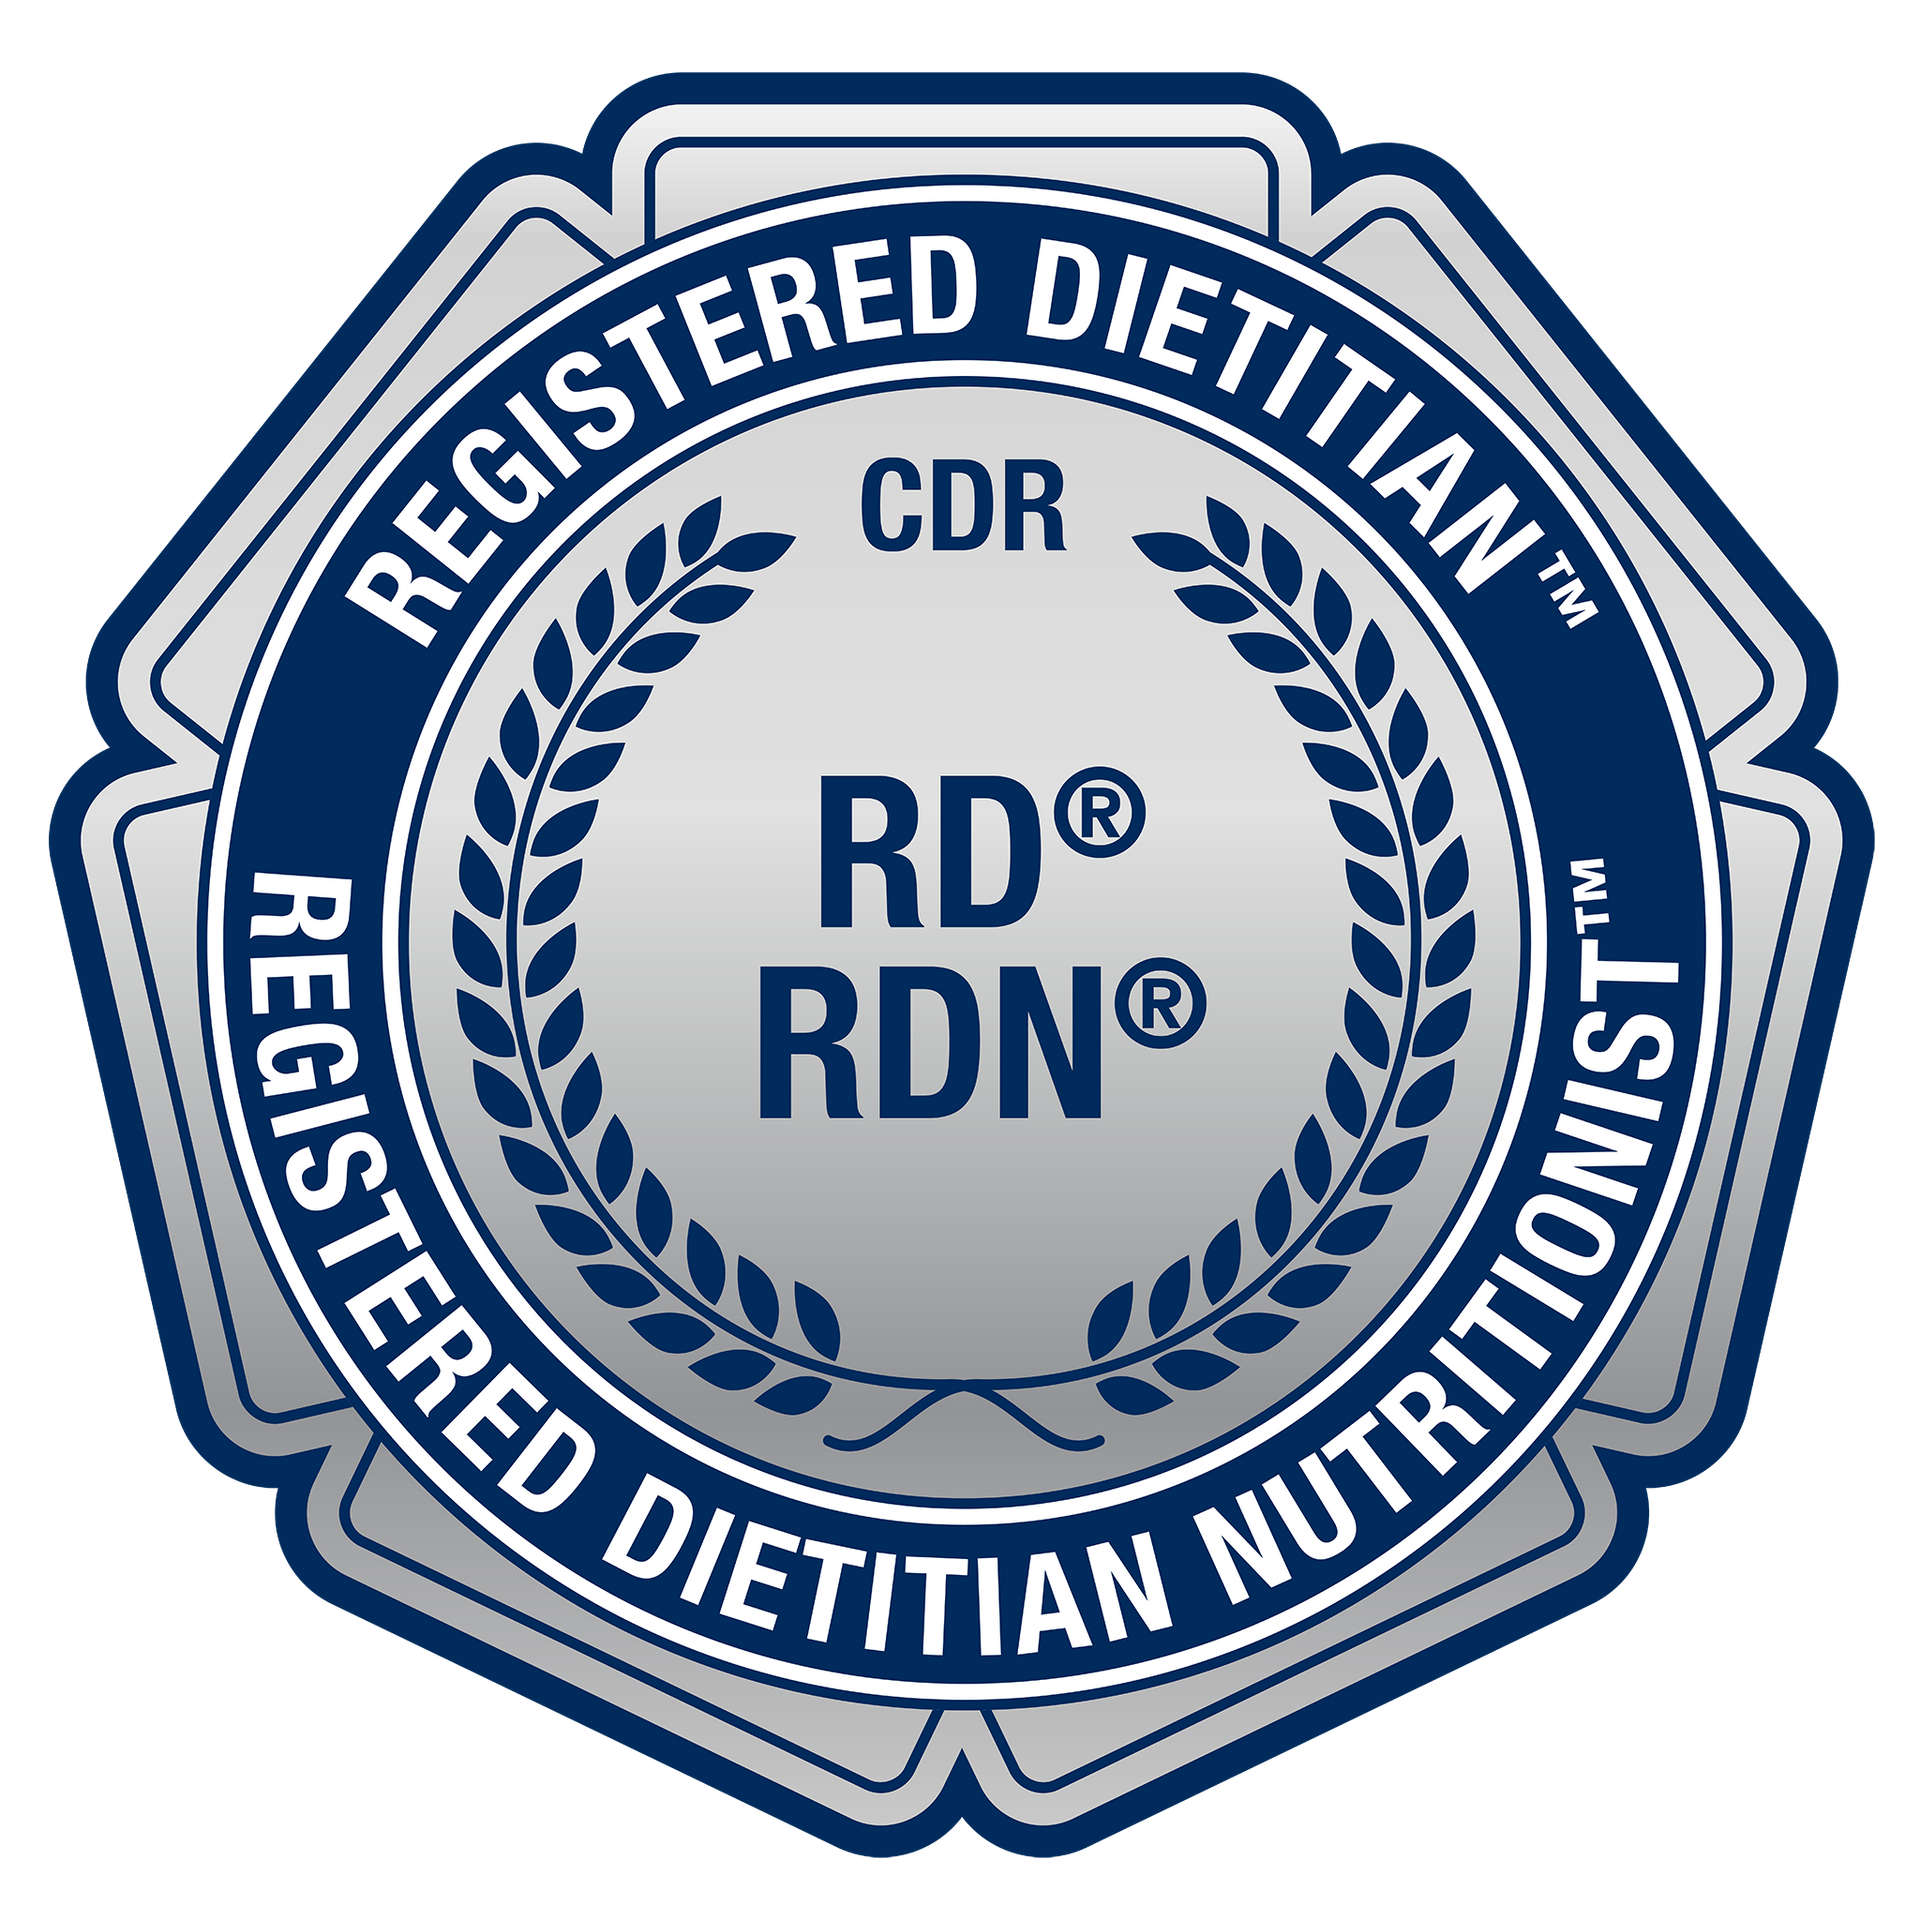 a badge that says registered dietitian nutritionist on it